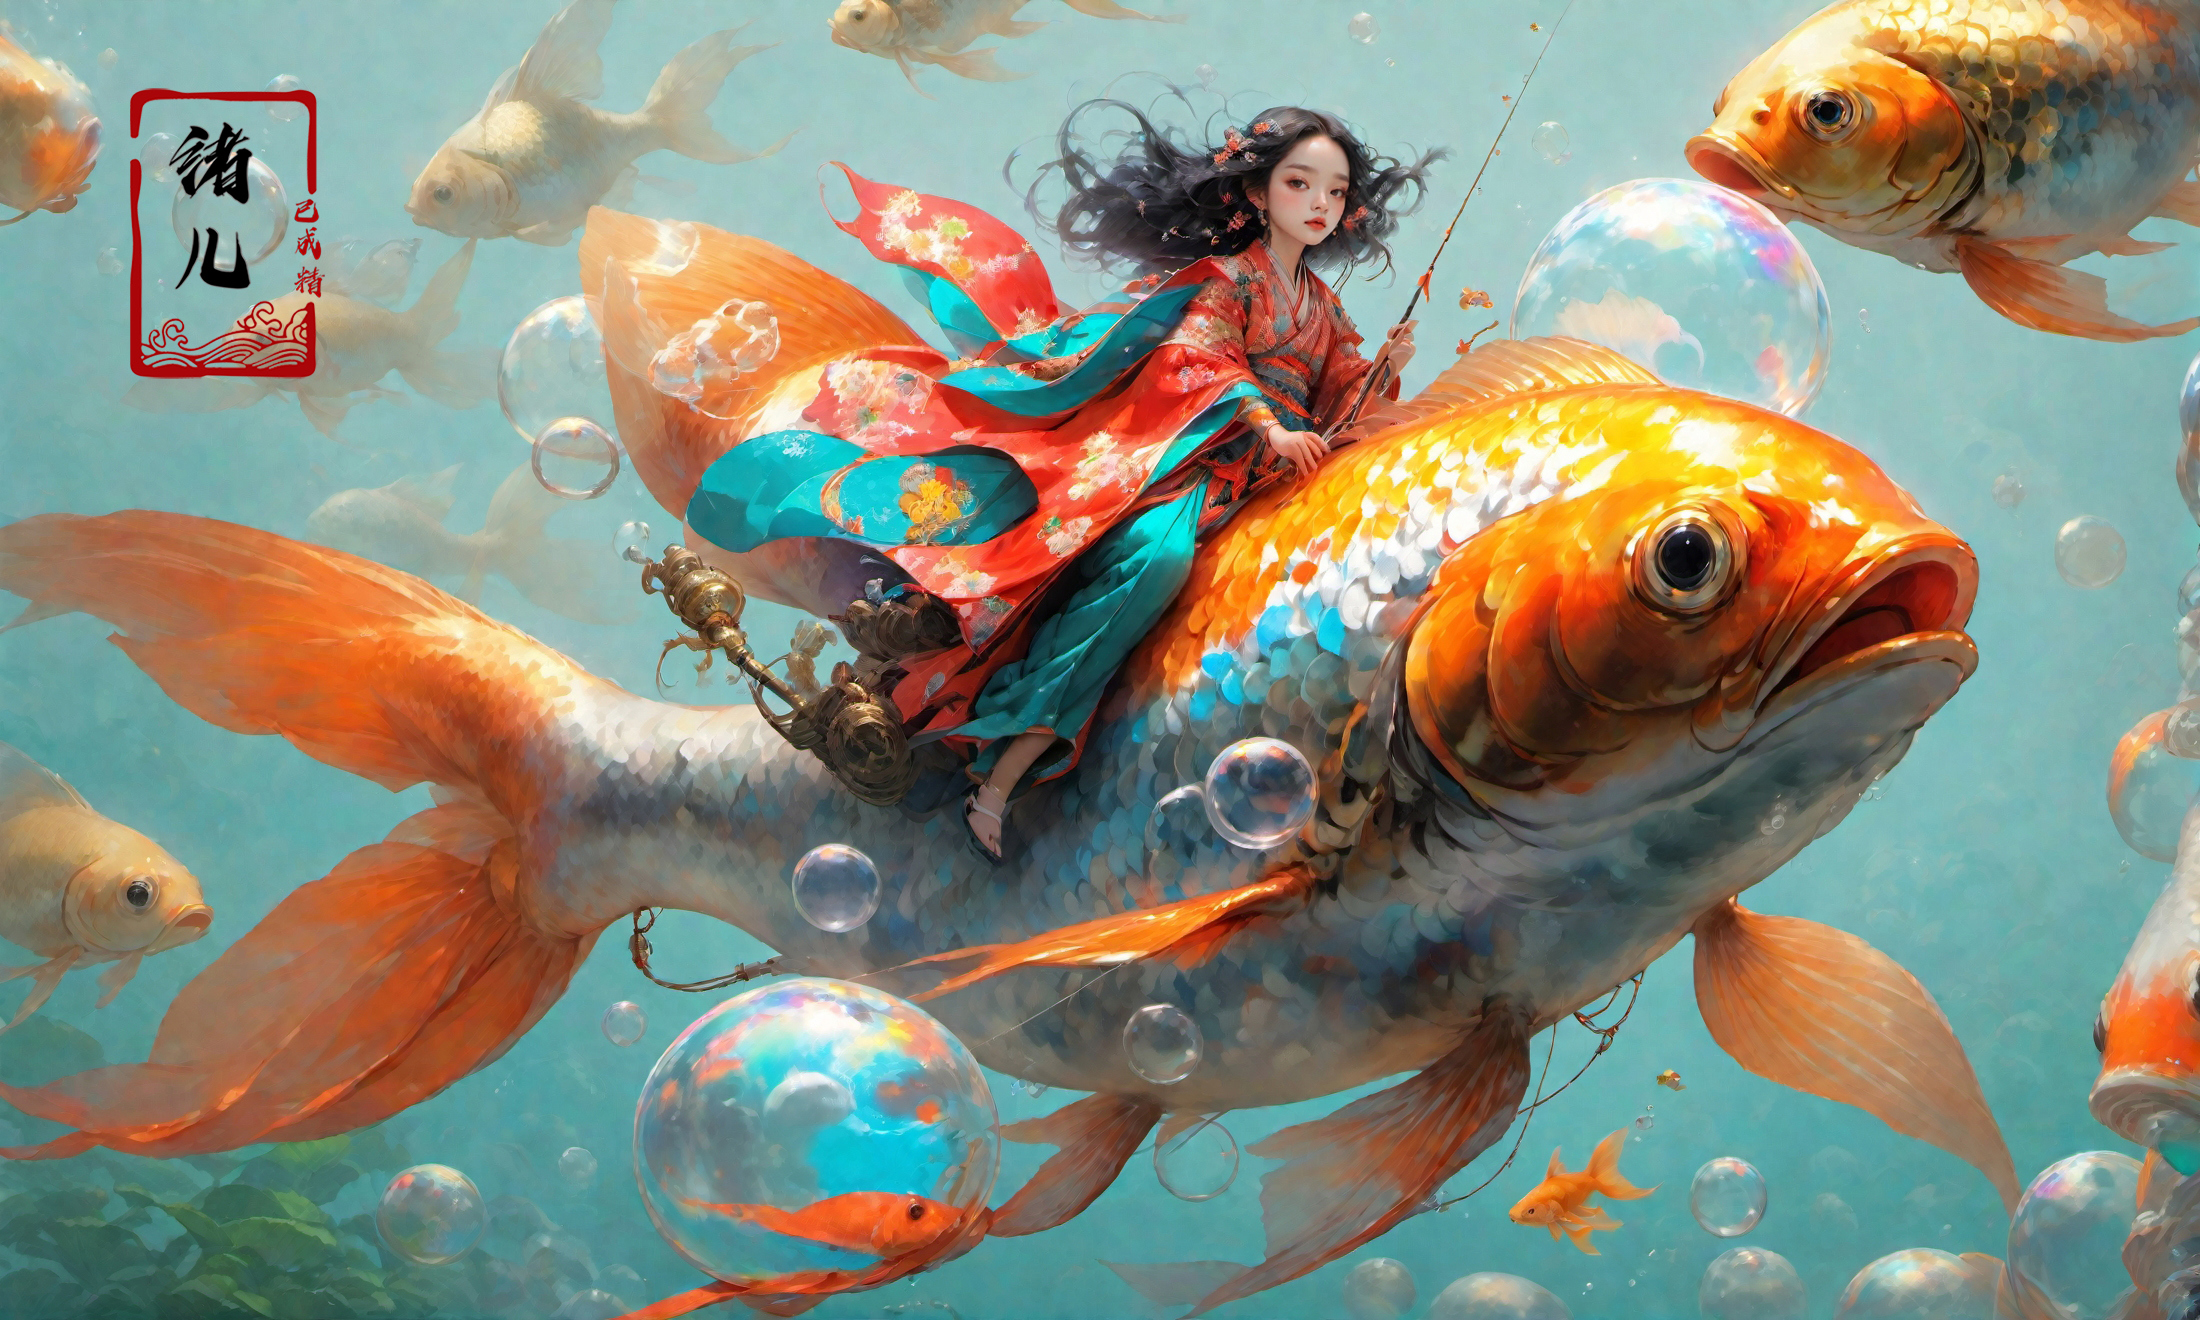 Asian Woman Riding a Giant Koi Fish in a Painting